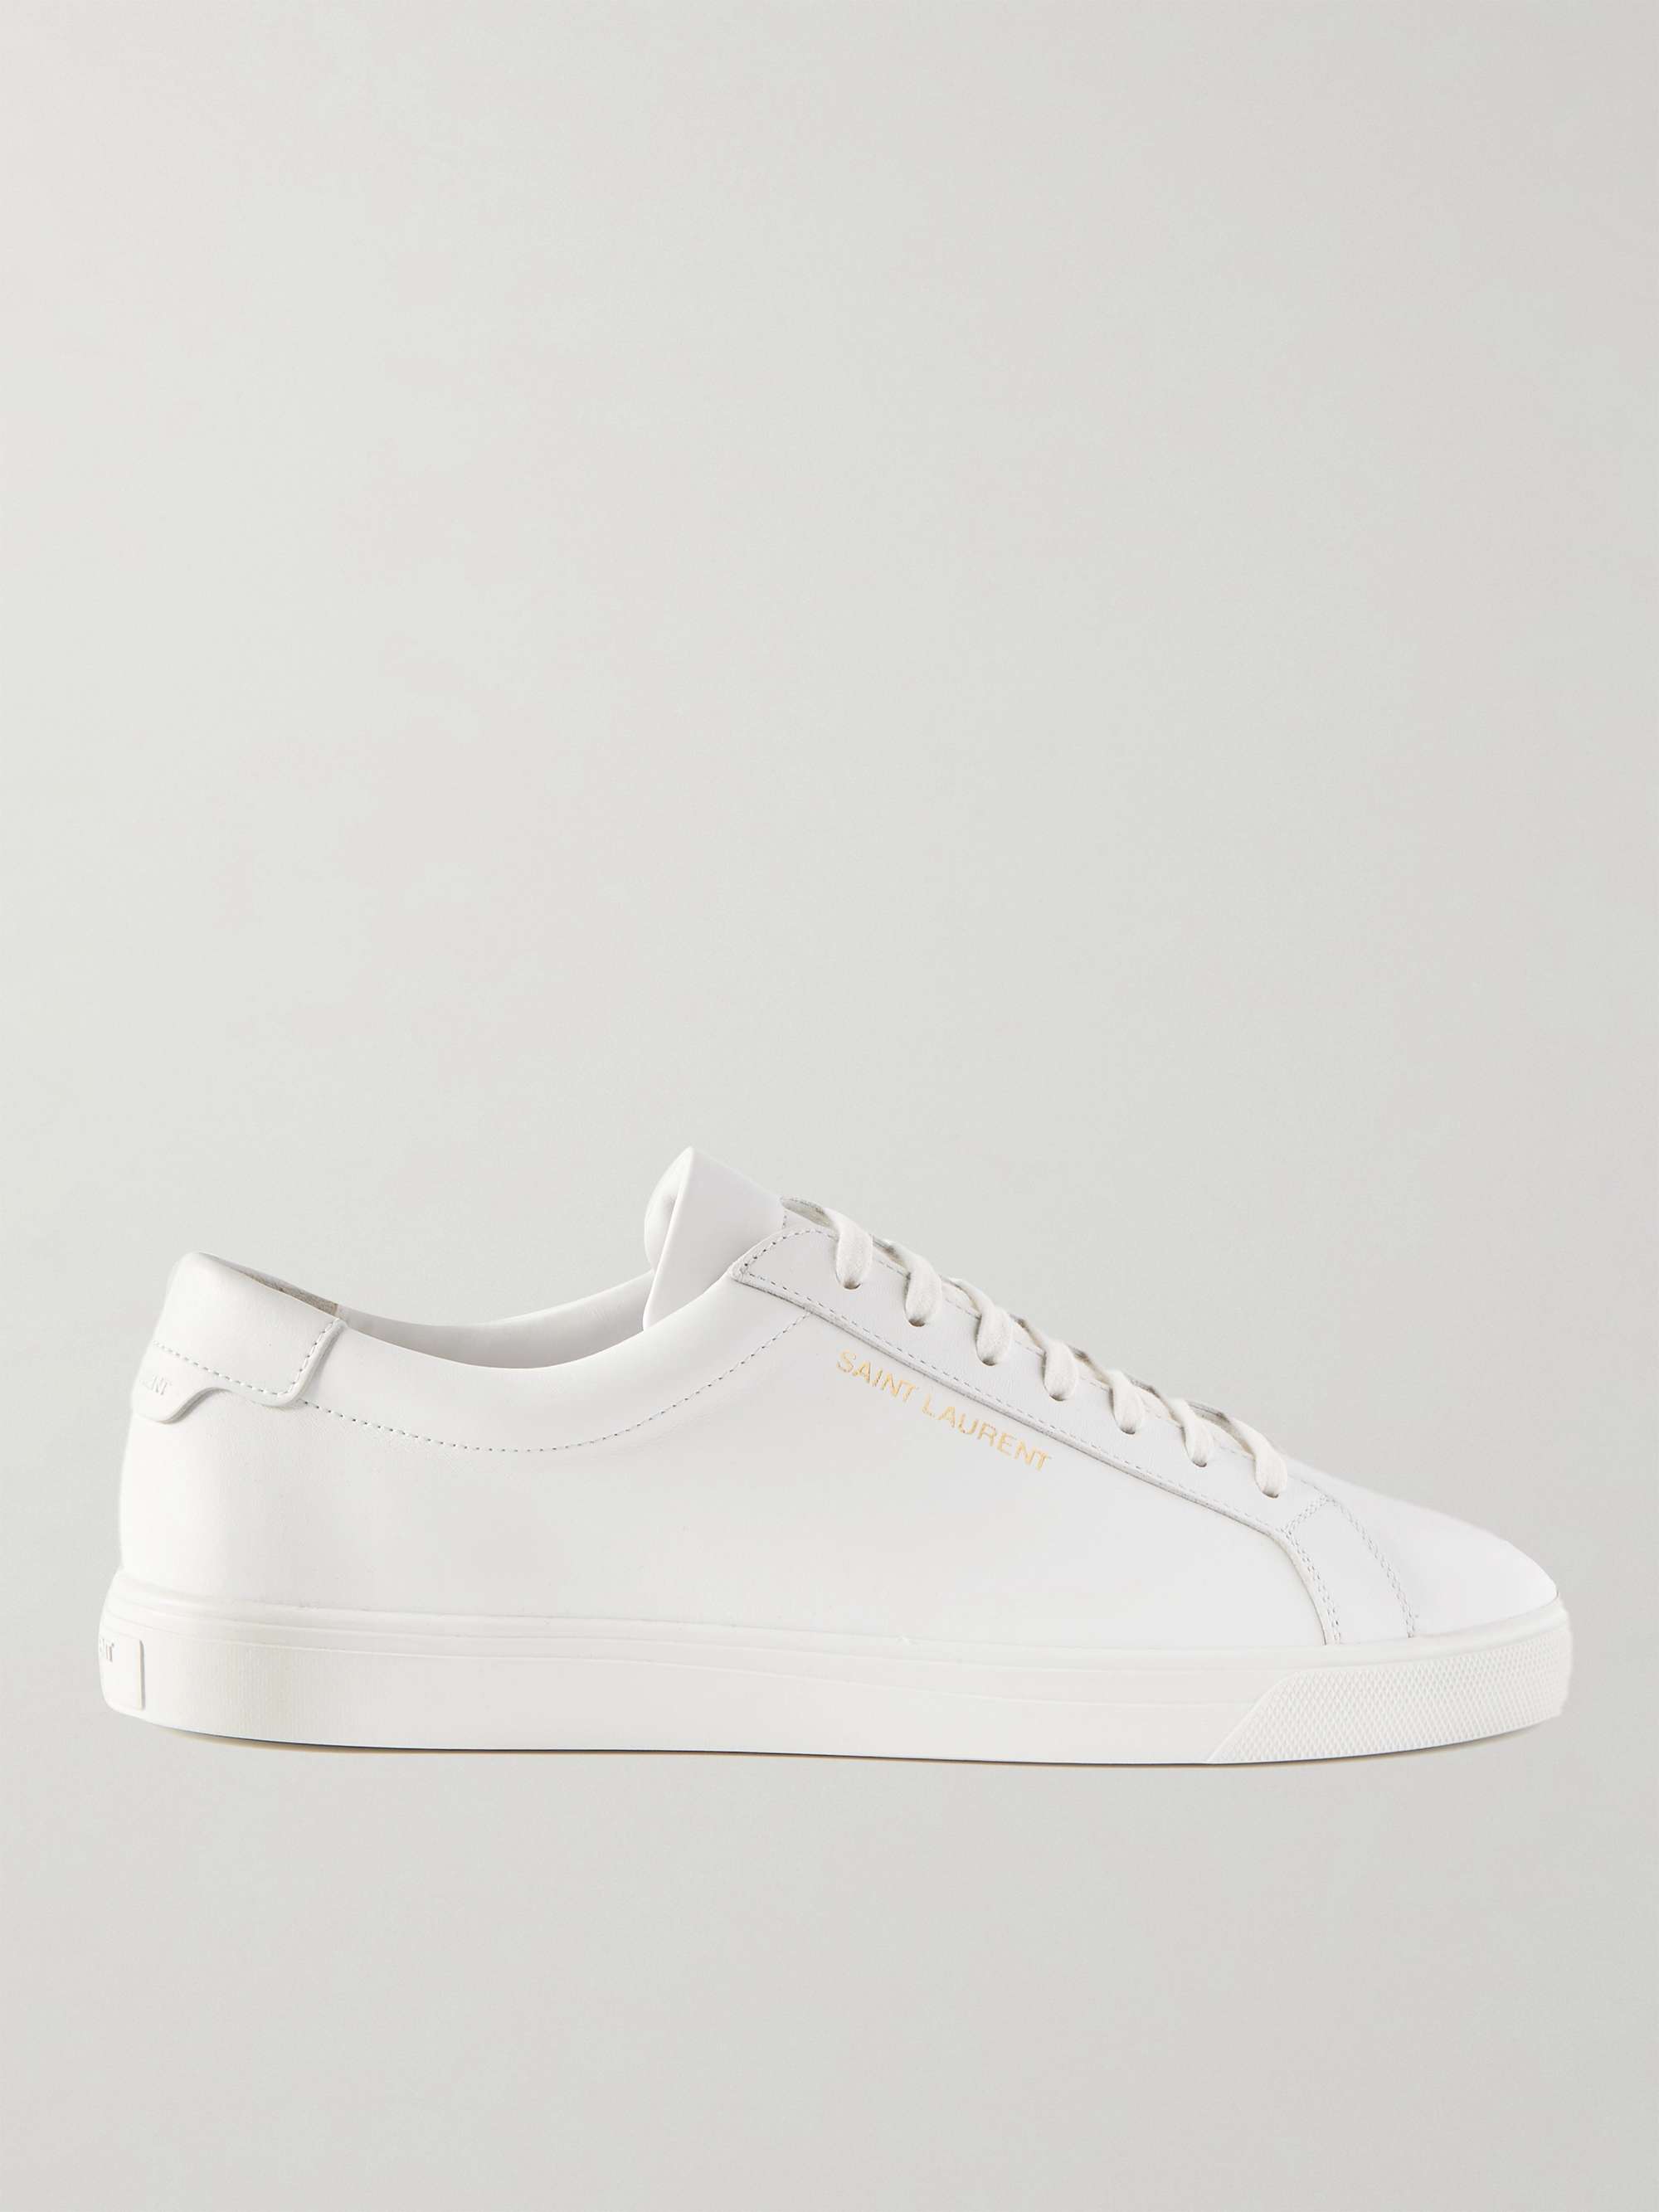 SAINT LAURENT Andy Leather Sneakers